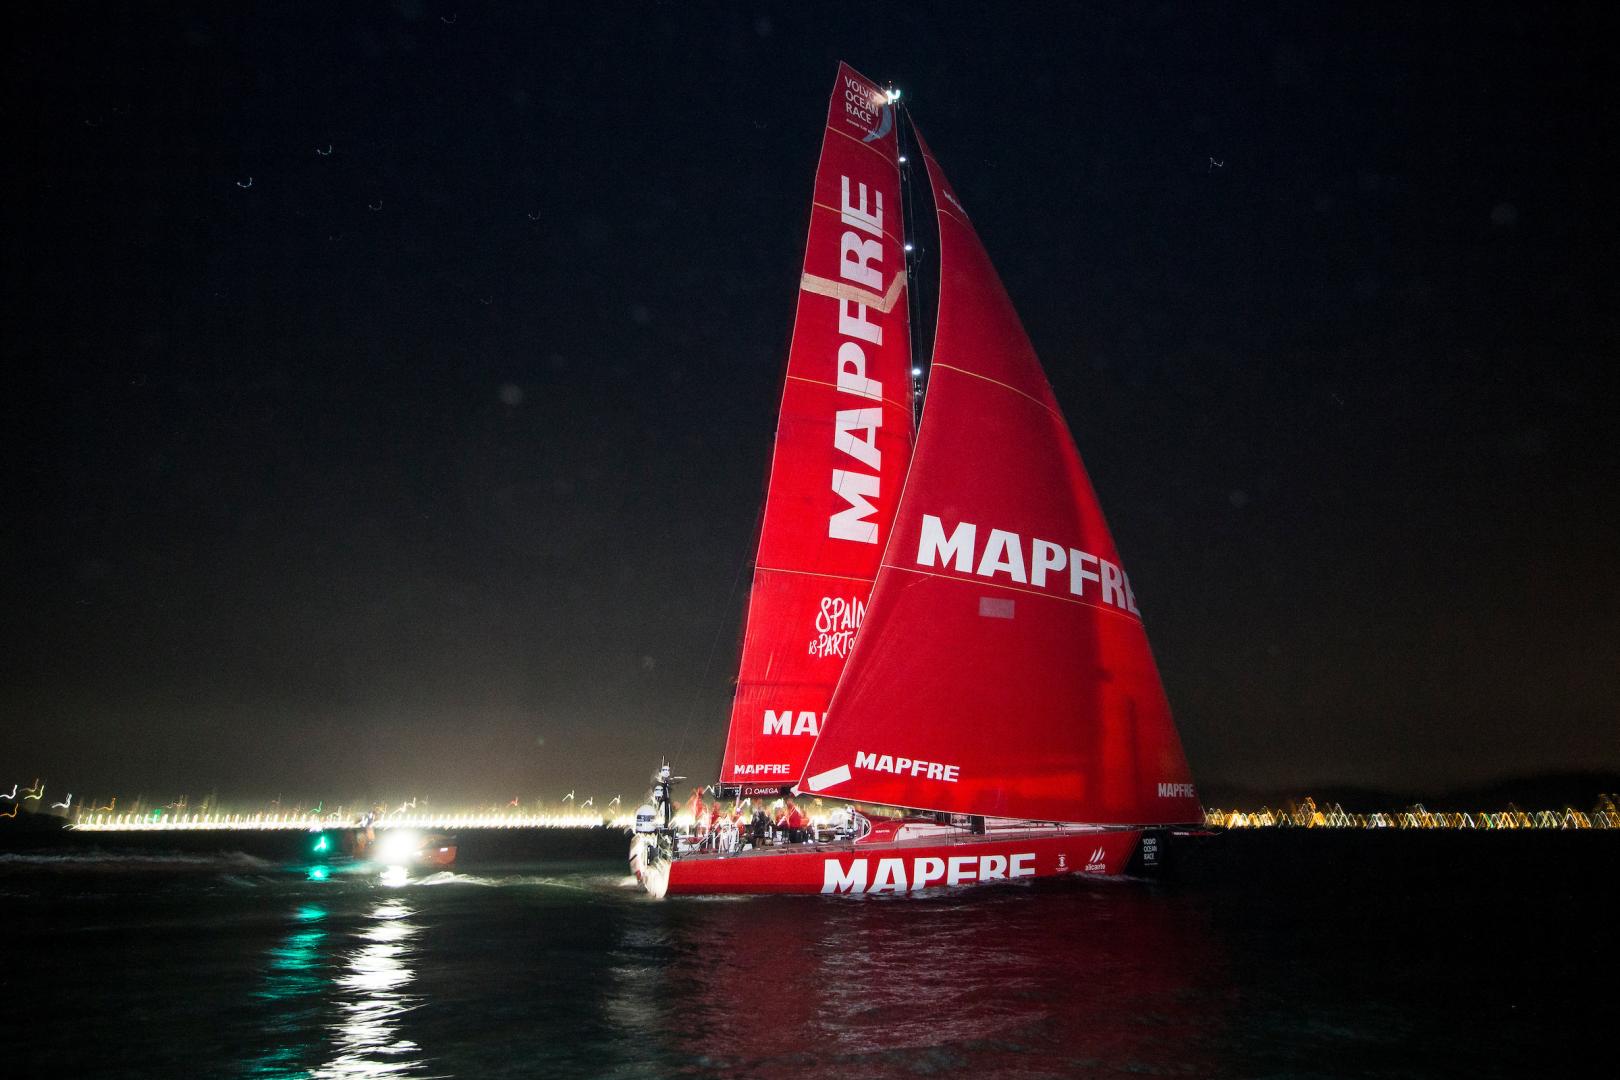 MAPFRE arrive in Brazil and conclude one of the toughest legs in recent years